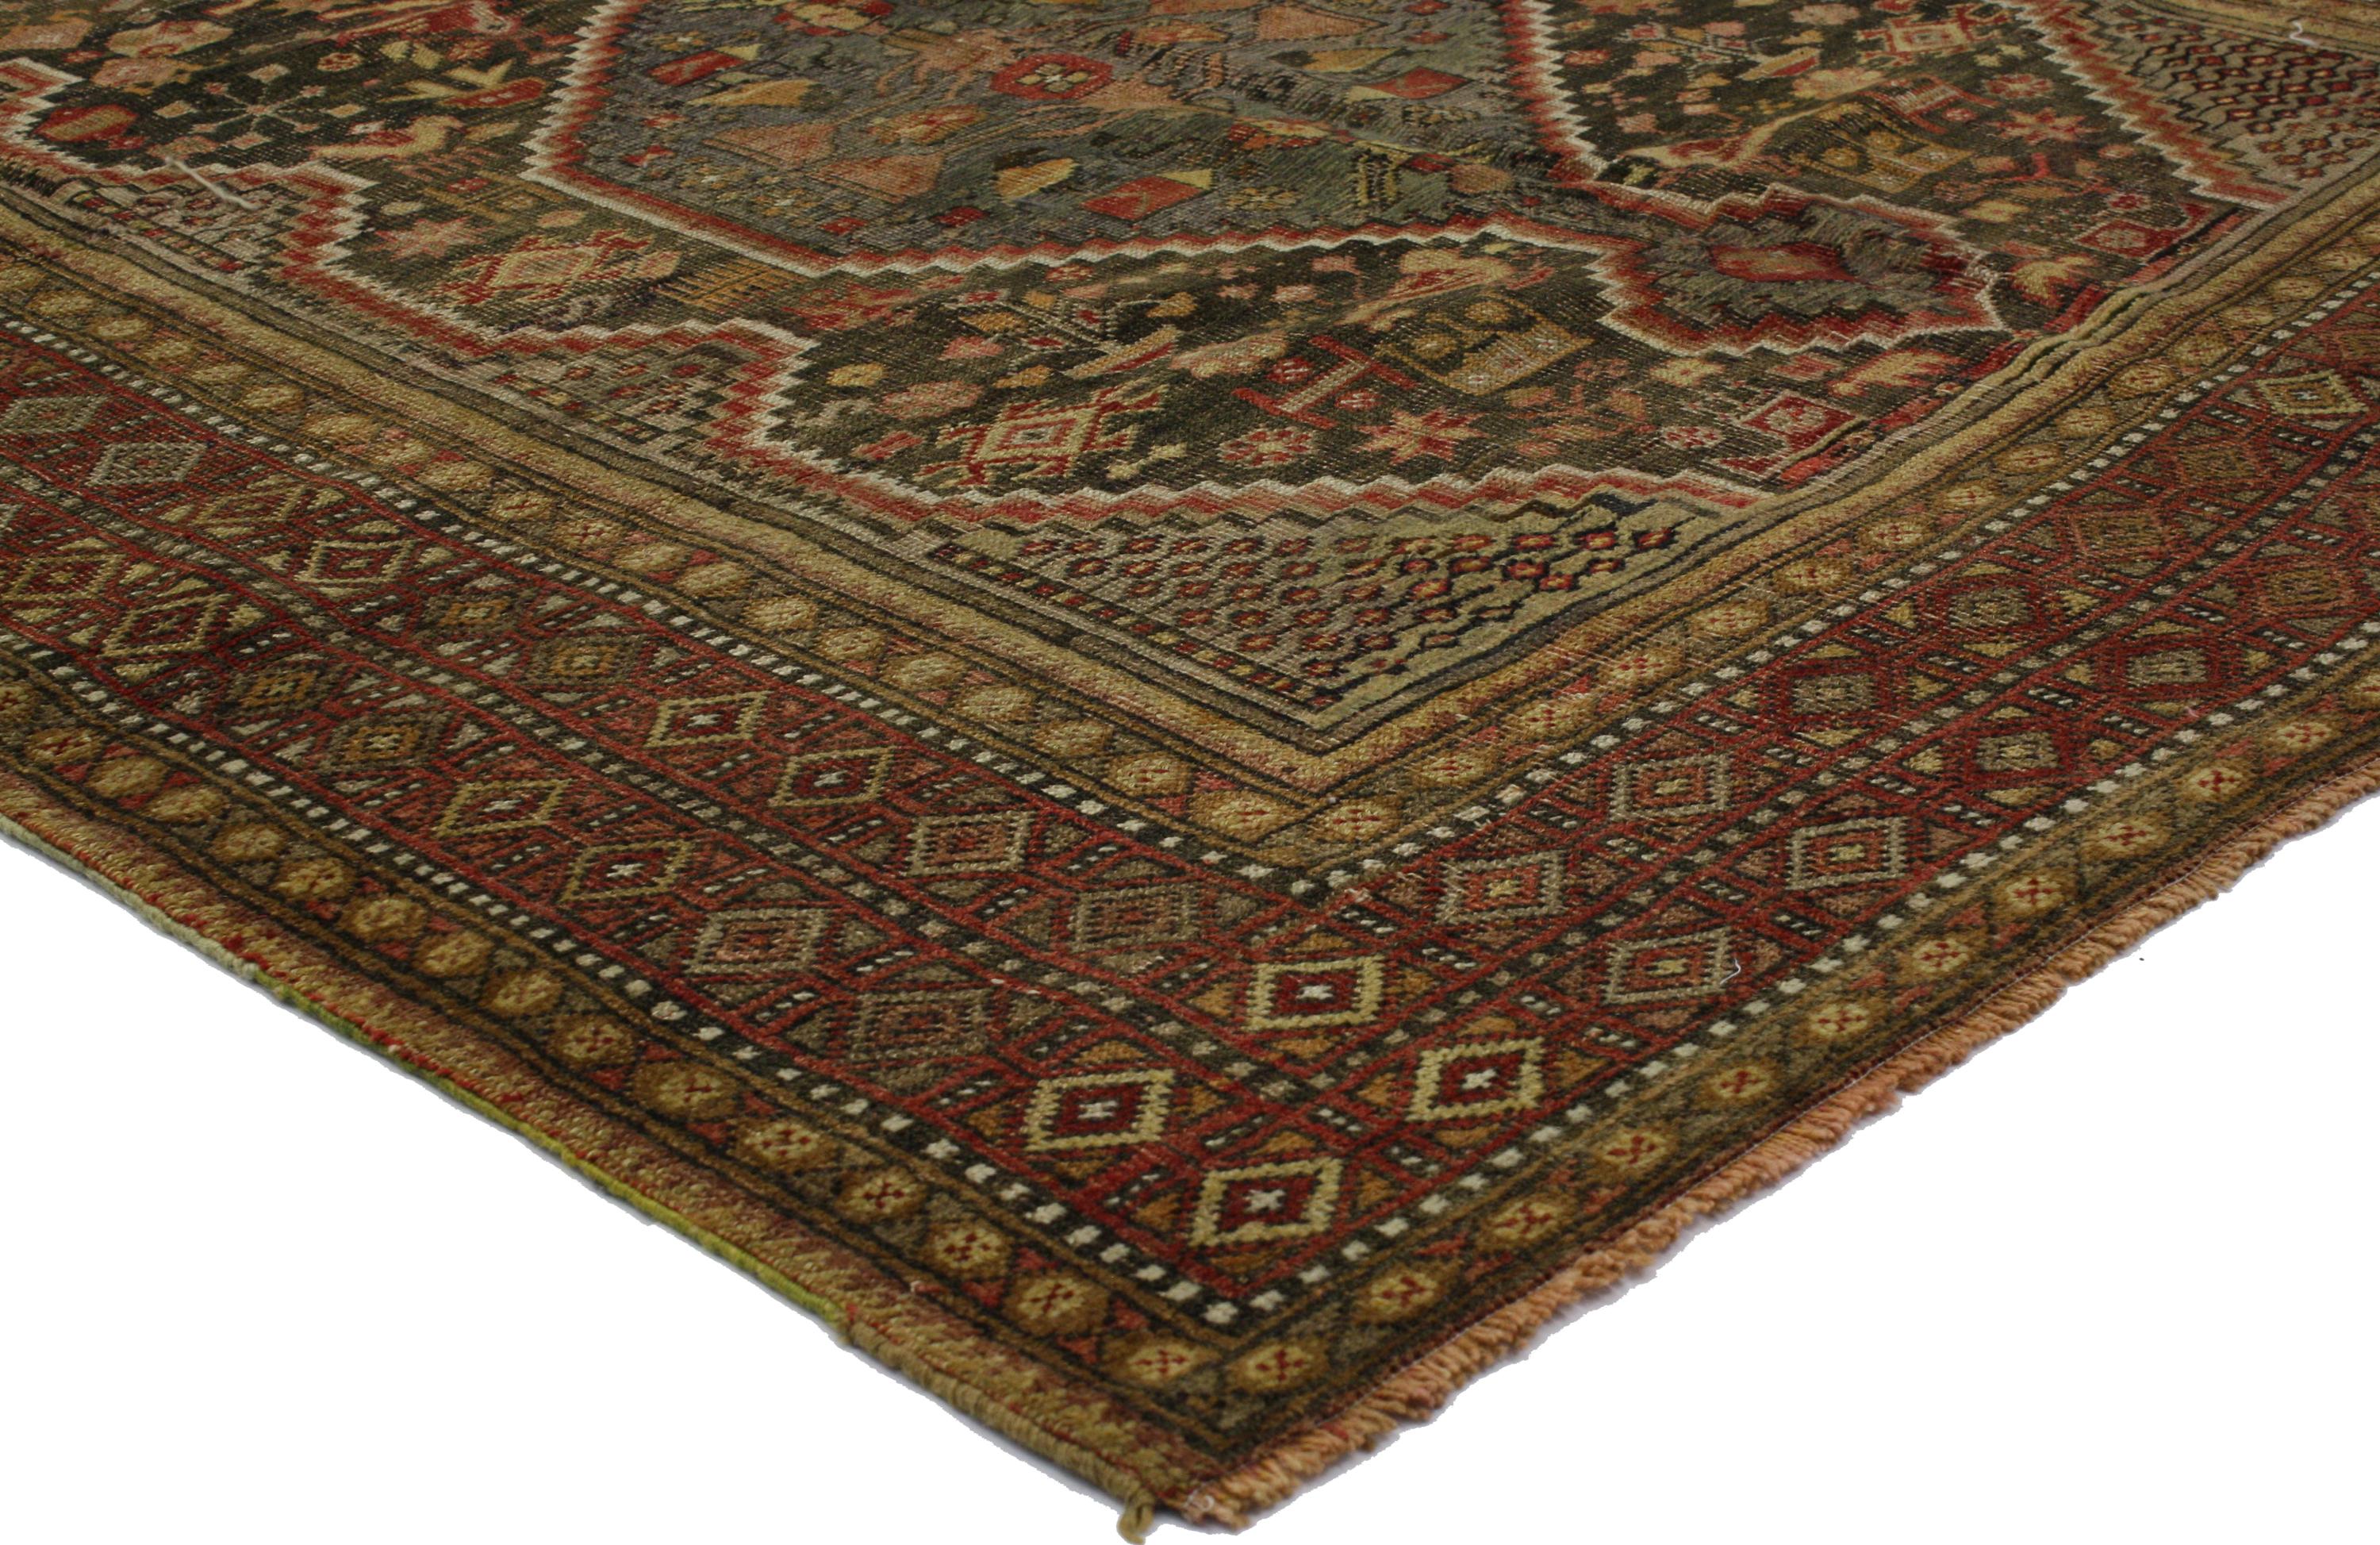 20th Century Distressed Antique Persian Shiraz Rug with Rustic Tribal Style